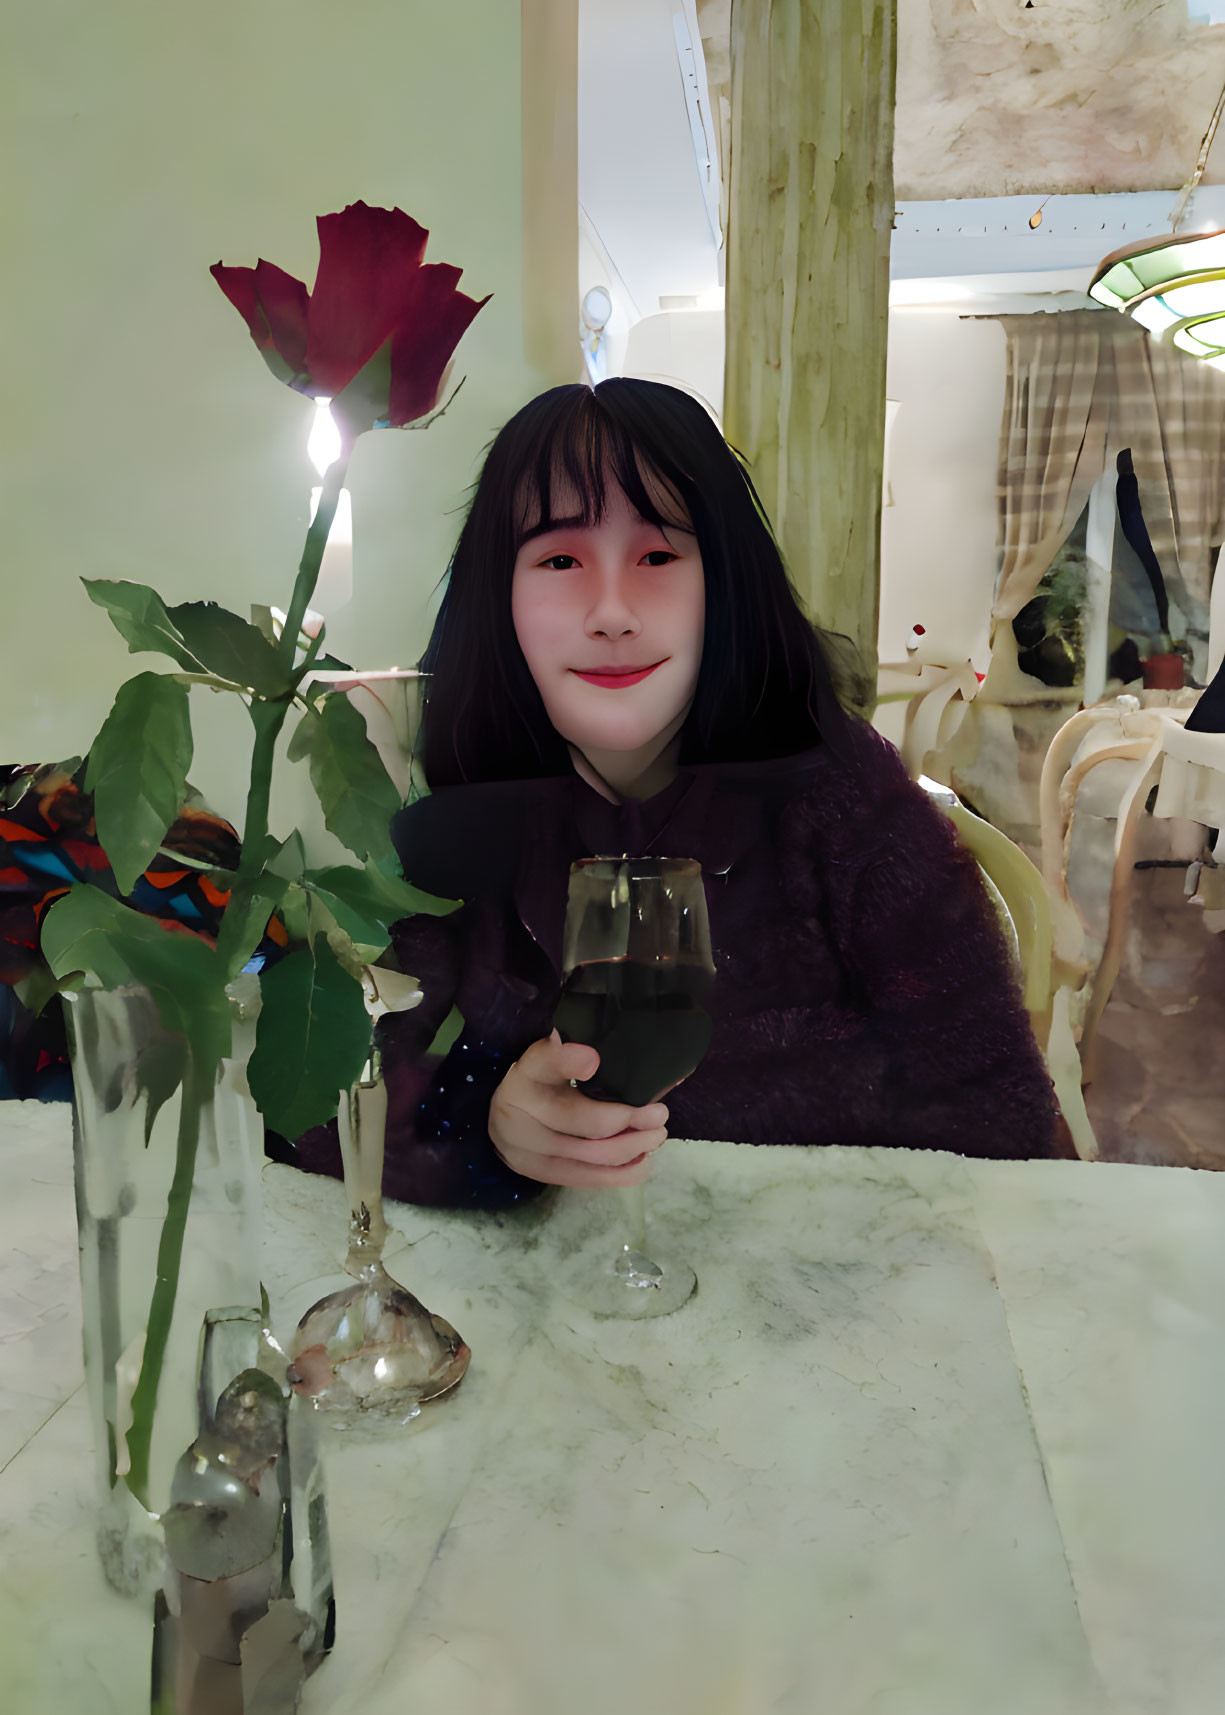 Smiling person with drink and rose at warmly lit table